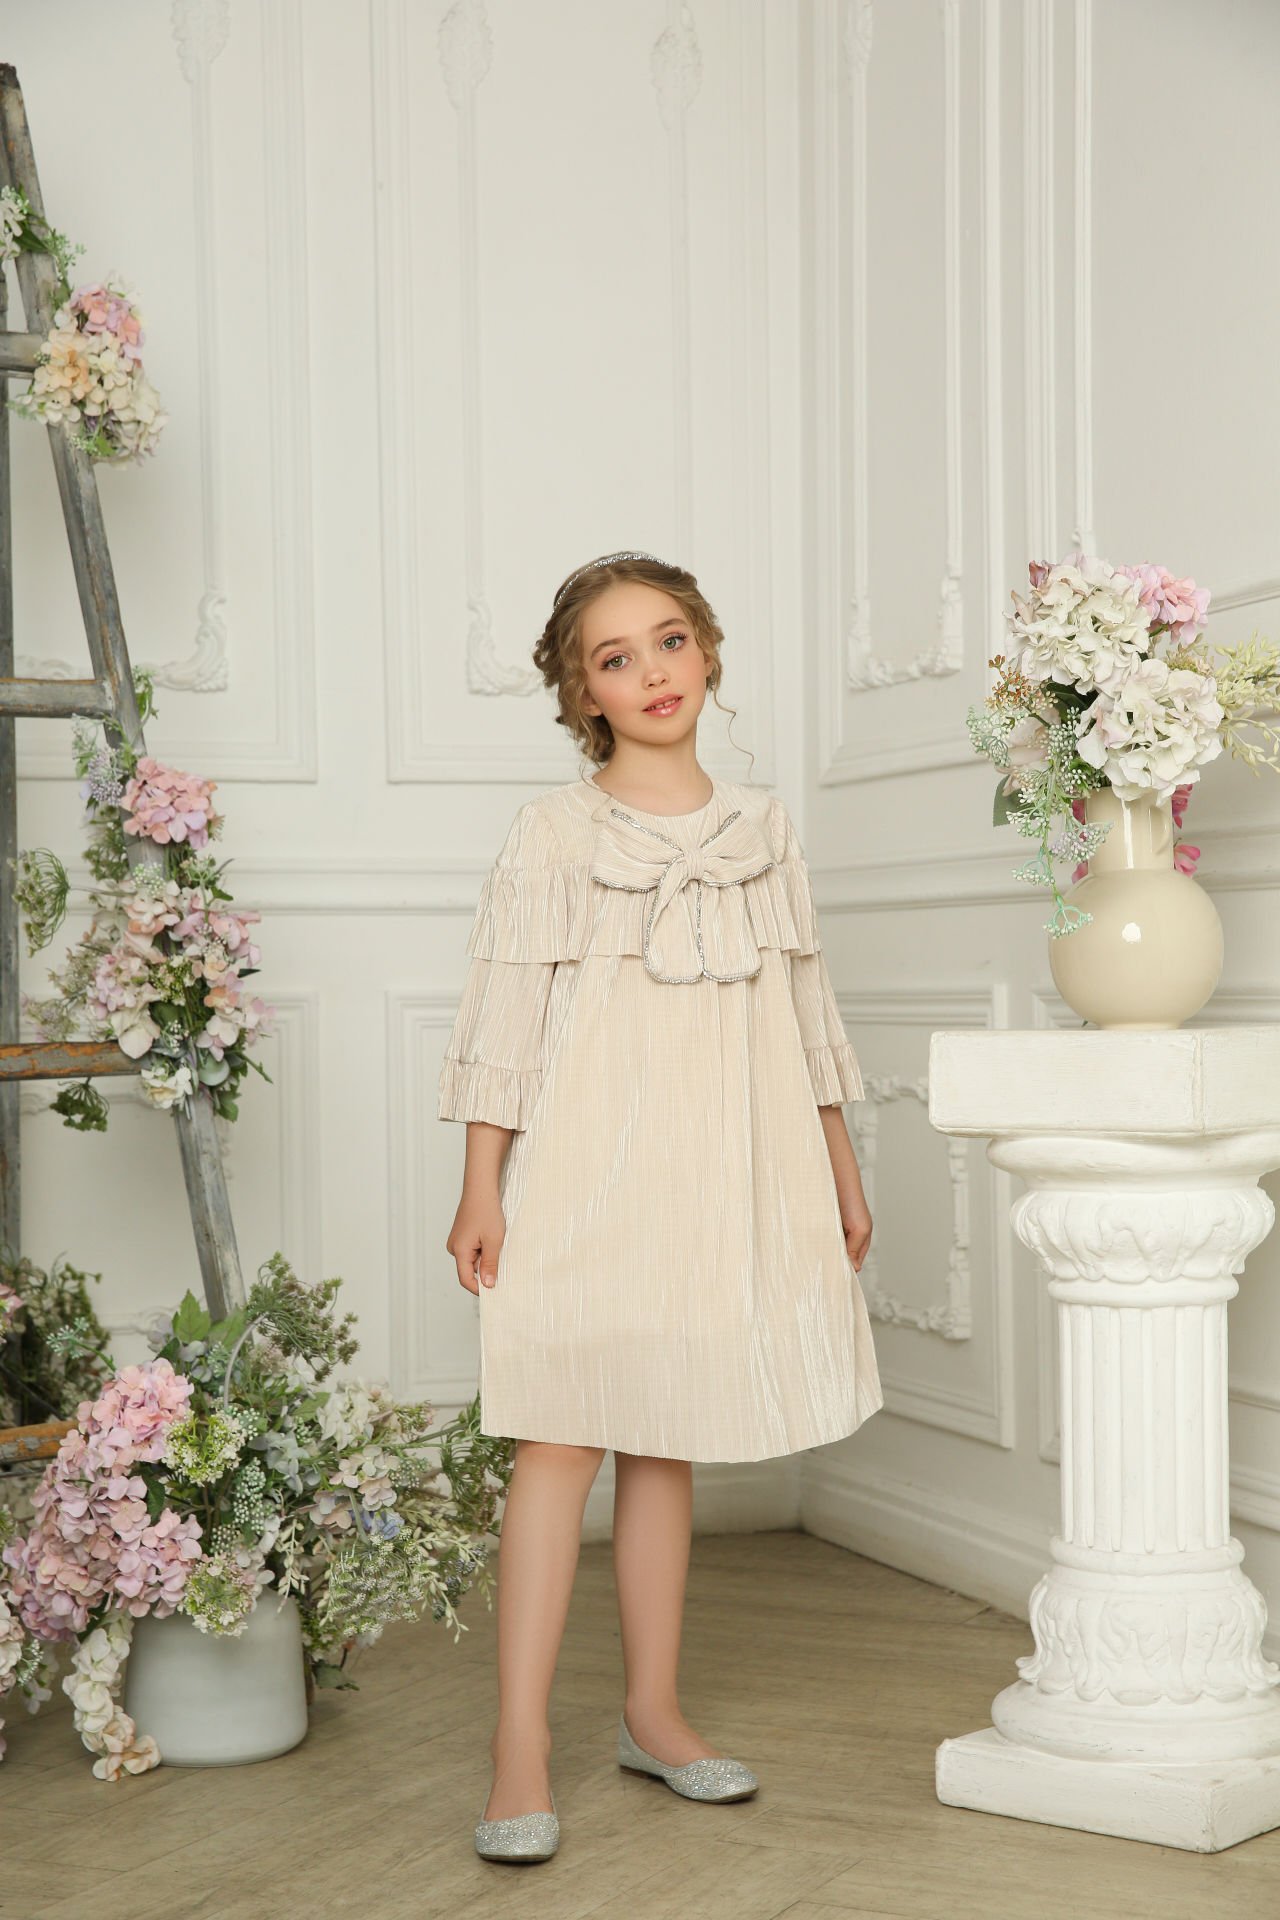 Light Party Dress With Hair Accessory Cream Color